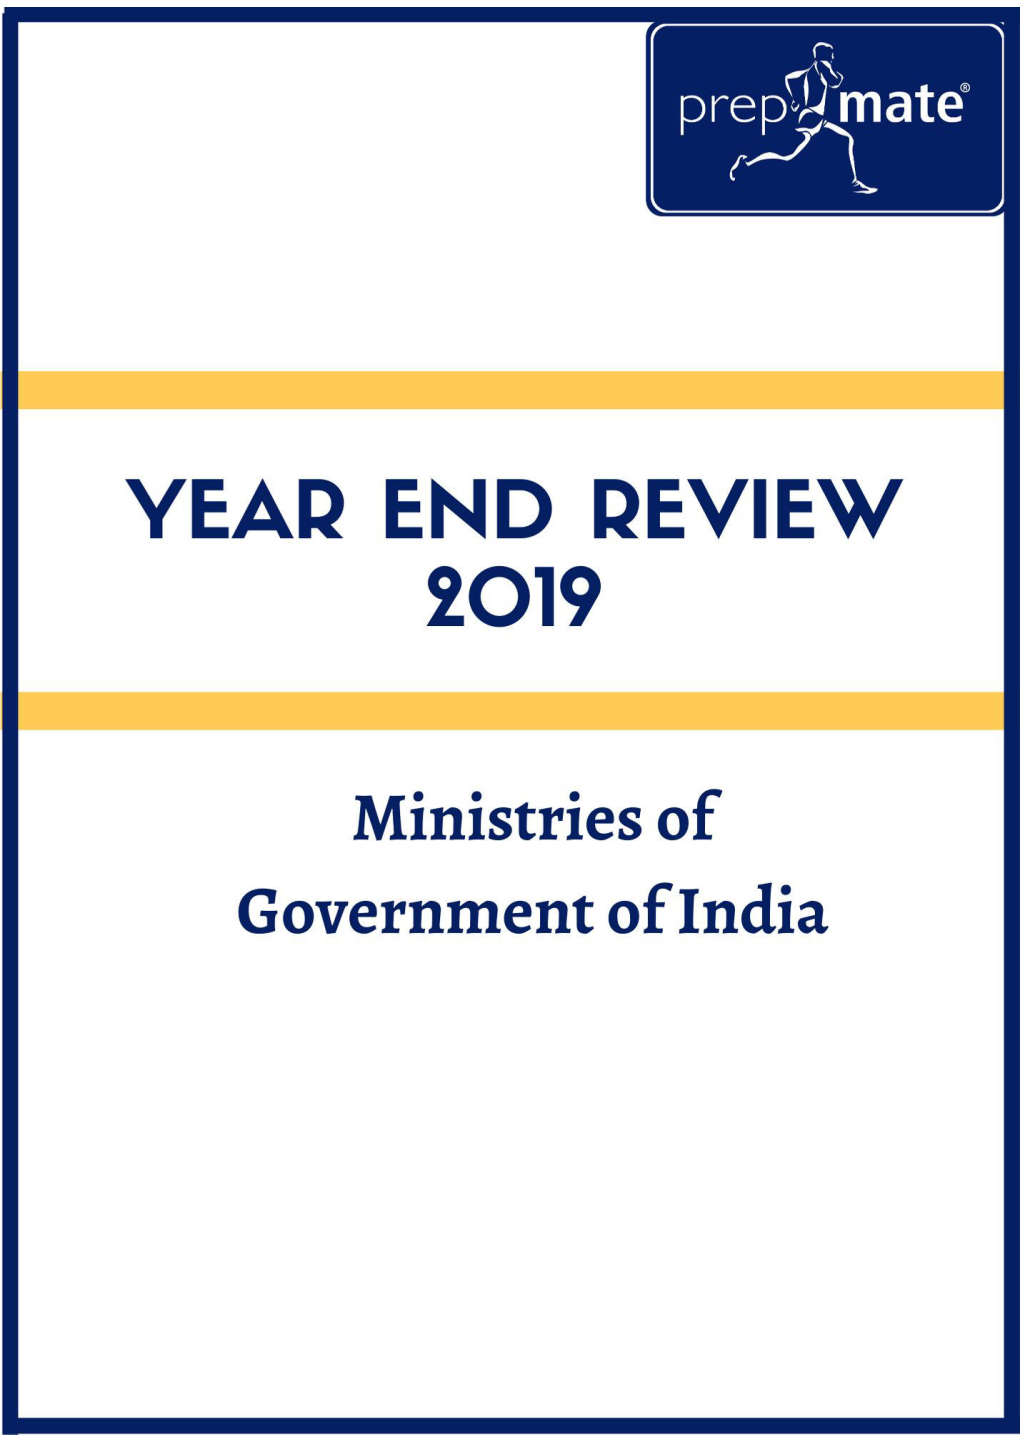 Year End Review: Ministry of I&B